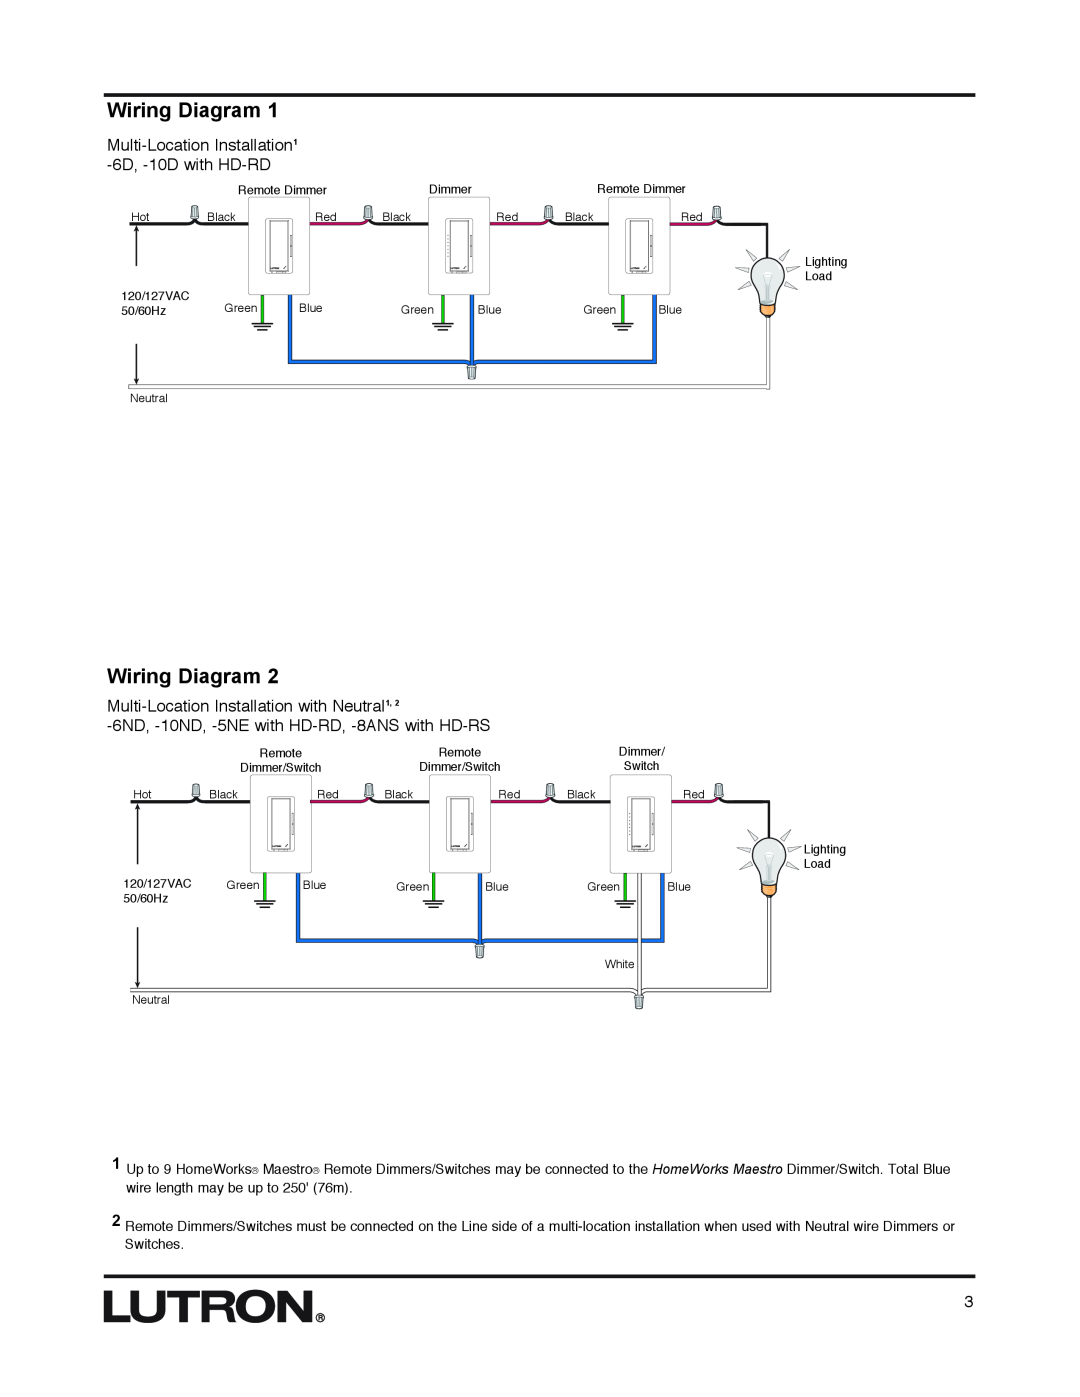 AMX HD-RS Wiring Diagram, Multi-Location Installation1 -6D, -10D with HD-RD, Multi-Location Installation with Neutral1 